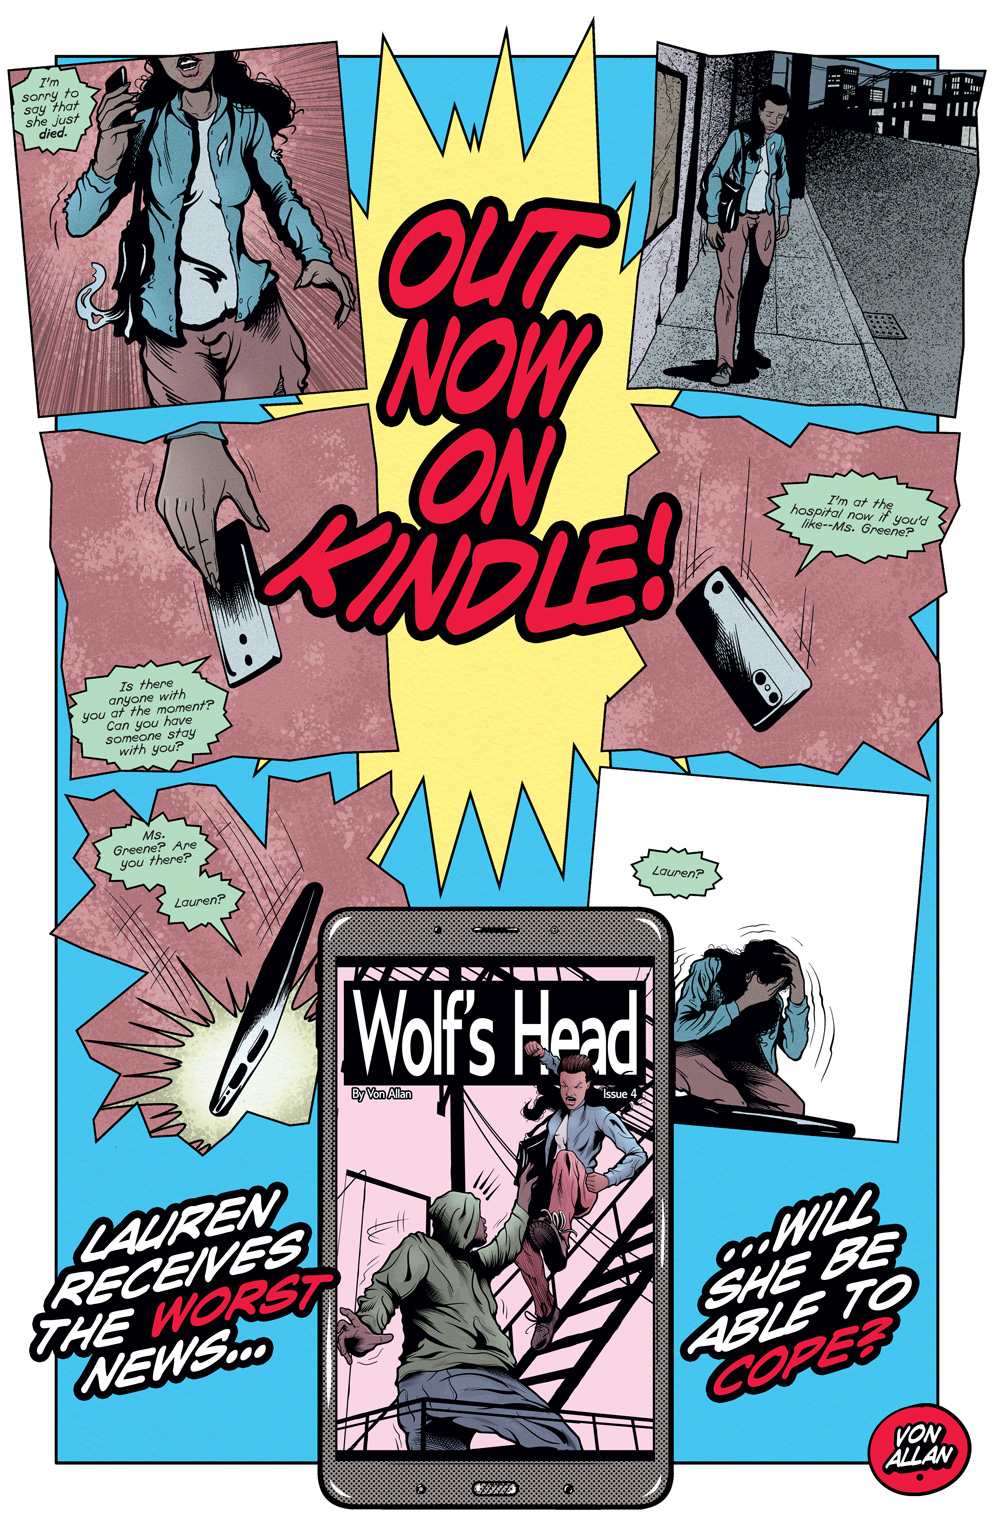 Teaser image for Wolf's Head issue 4 on Kindle